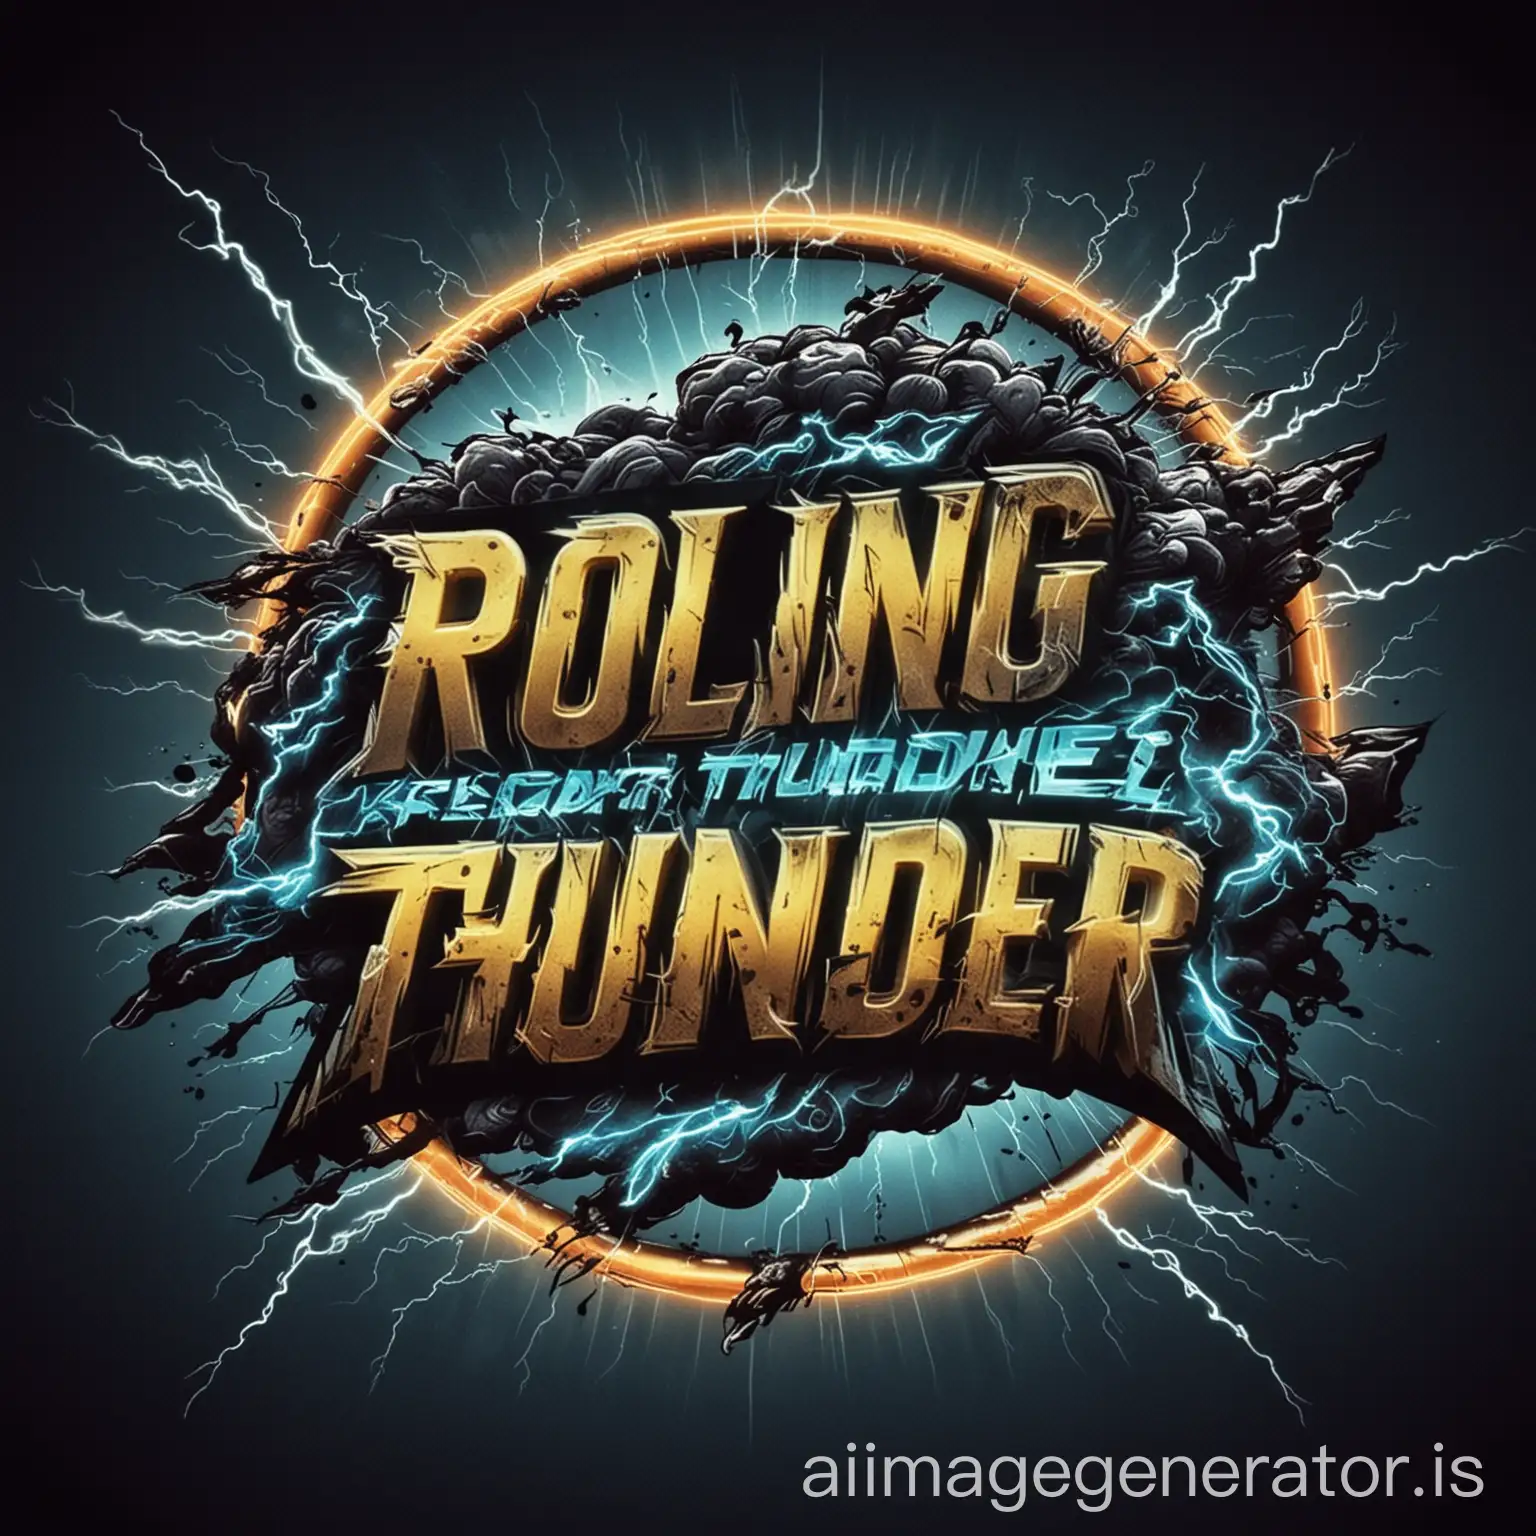 Create an Instagram profile picture for a sports team named "Rolling Thunder." The design should be bold, dynamic, and visually striking, reflecting the energy and power of the team. Consider the following elements:

Theme and Colors: Use a dark and stormy theme with a palette of deep blues, blacks, and electric yellows to evoke the intensity of a thunderstorm.
Imagery: Incorporate a stylized thundercloud and lightning bolts, emphasizing motion and strength. The lightning should look powerful and electrifying.
Logo: Feature the team name "Rolling Thunder" prominently. Use a strong, modern font, possibly with a metallic or neon glow effect to make it stand out.
Symbols: Include elements that suggest speed and power, such as a rolling wheel or abstract lines indicating movement.
Style: Aim for a mix of realism and comic-book style, capturing both the ferocity of nature and the high energy of a sports team.
Background: The background should be subtle but dynamic, possibly a stormy sky or a dark gradient with hints of lightning.
Ensure the overall design is clear and recognizable even when scaled down to thumbnail size for an Instagram profile picture. Dont try to write out rolling thunder, instead simply write RT